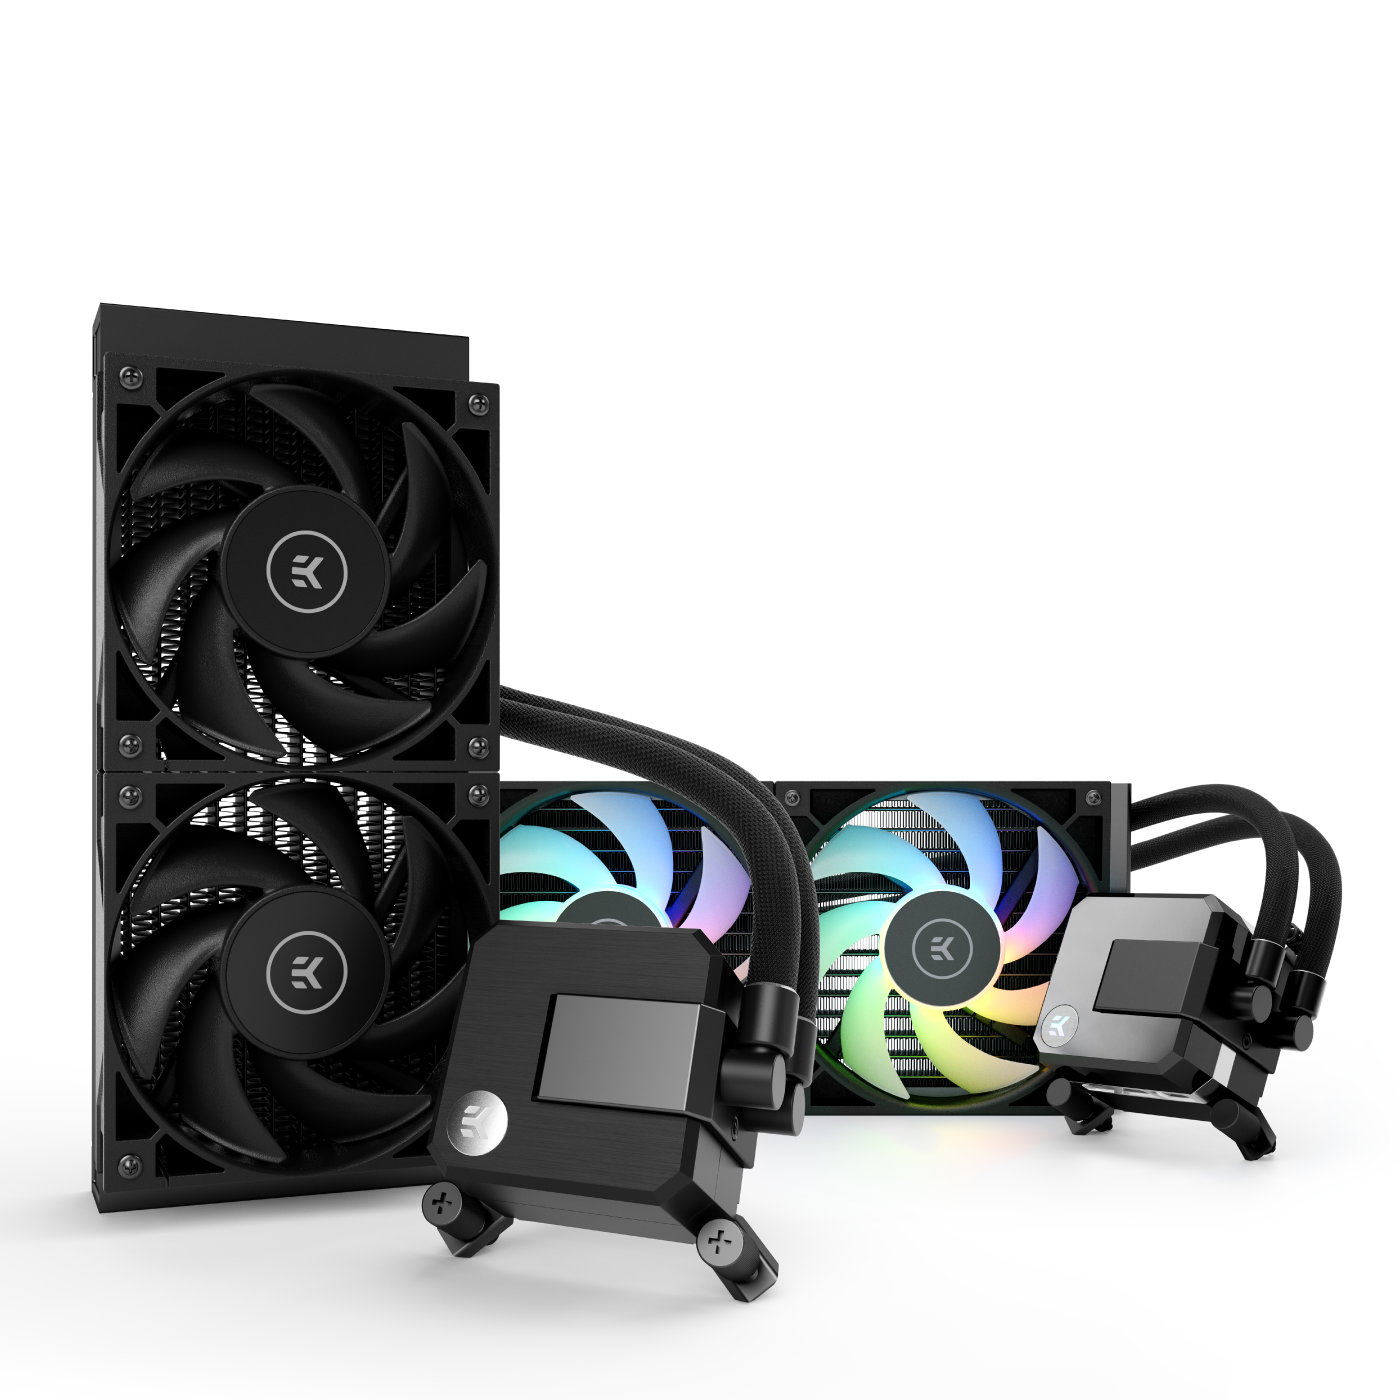 EK AIOs (All-In-One) Liquid Cooling Products: Elite 280 and Basic 240 Models